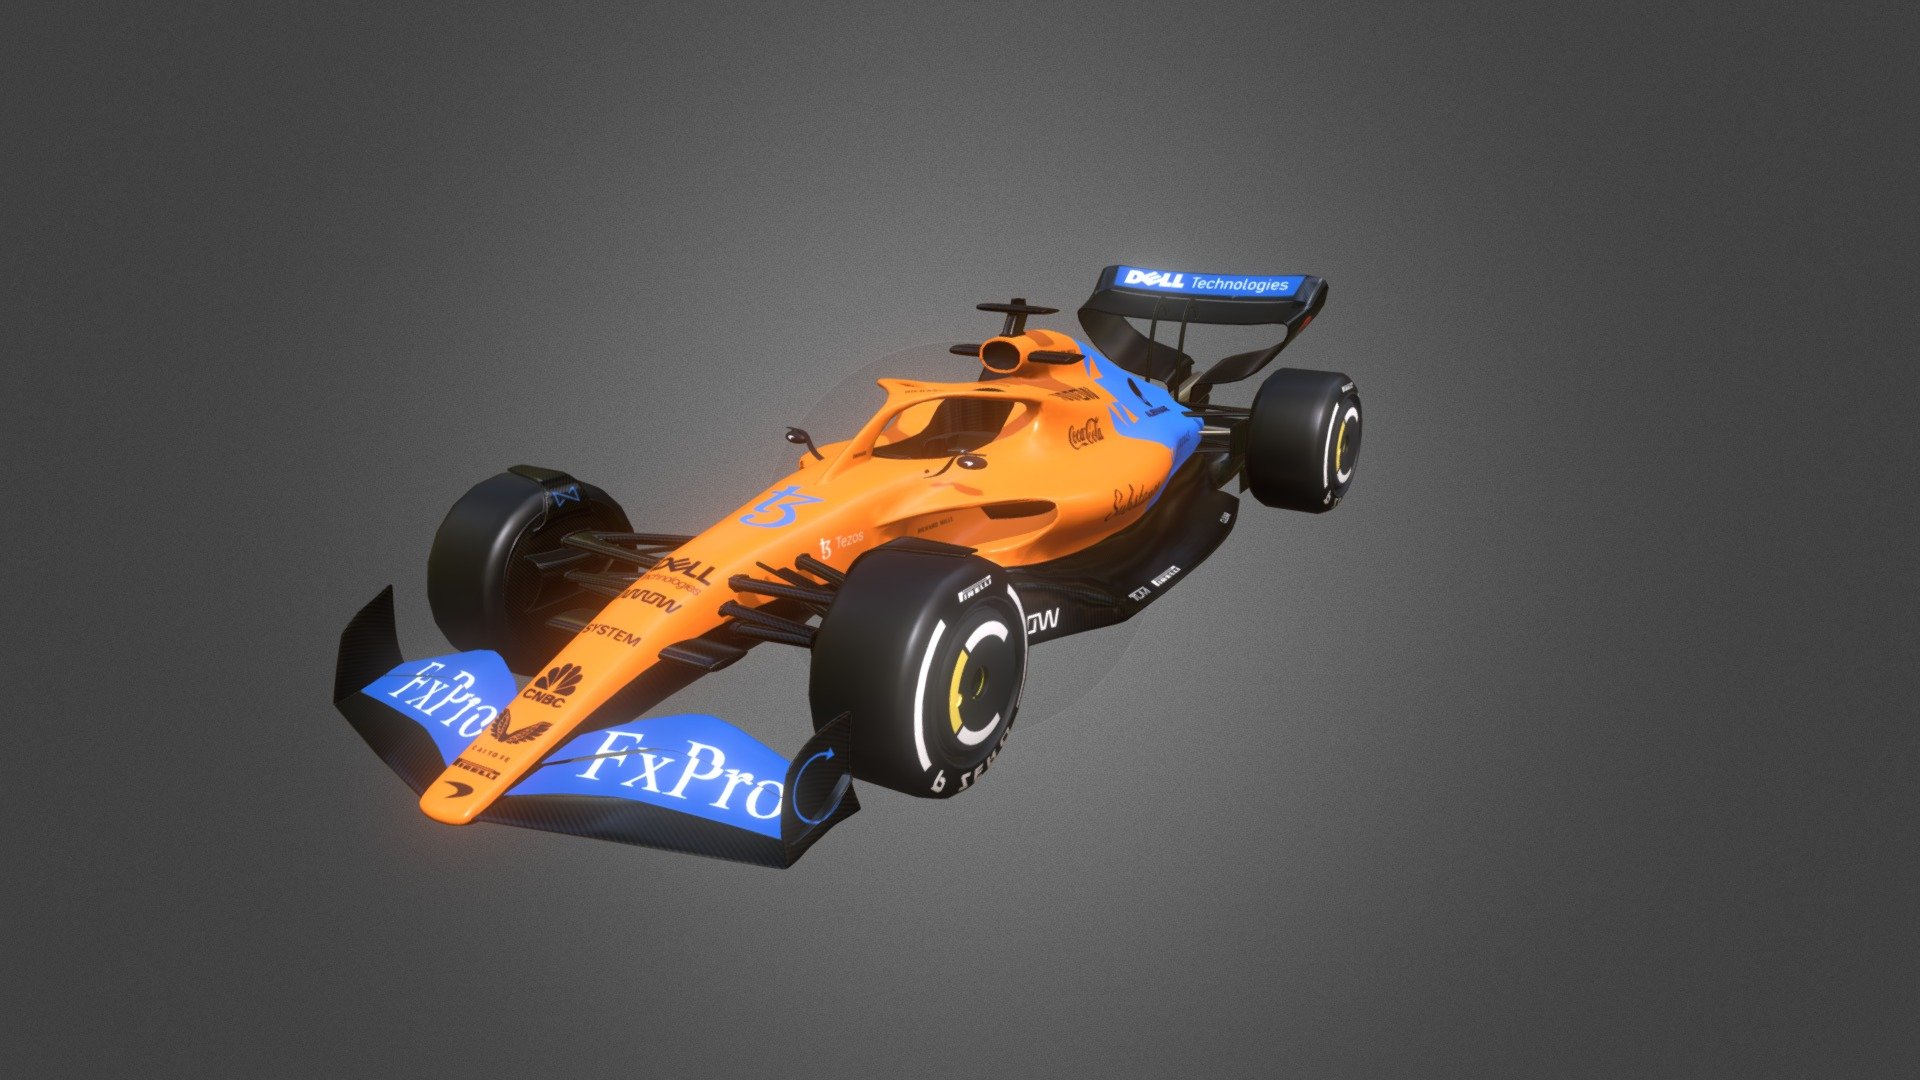 Did with Maya 2022, Substance painter

2022 Formula 1 concept, ready to be use in a game - Formula 1 (2022 concept) - 3D model by SanglierCorse 3d model